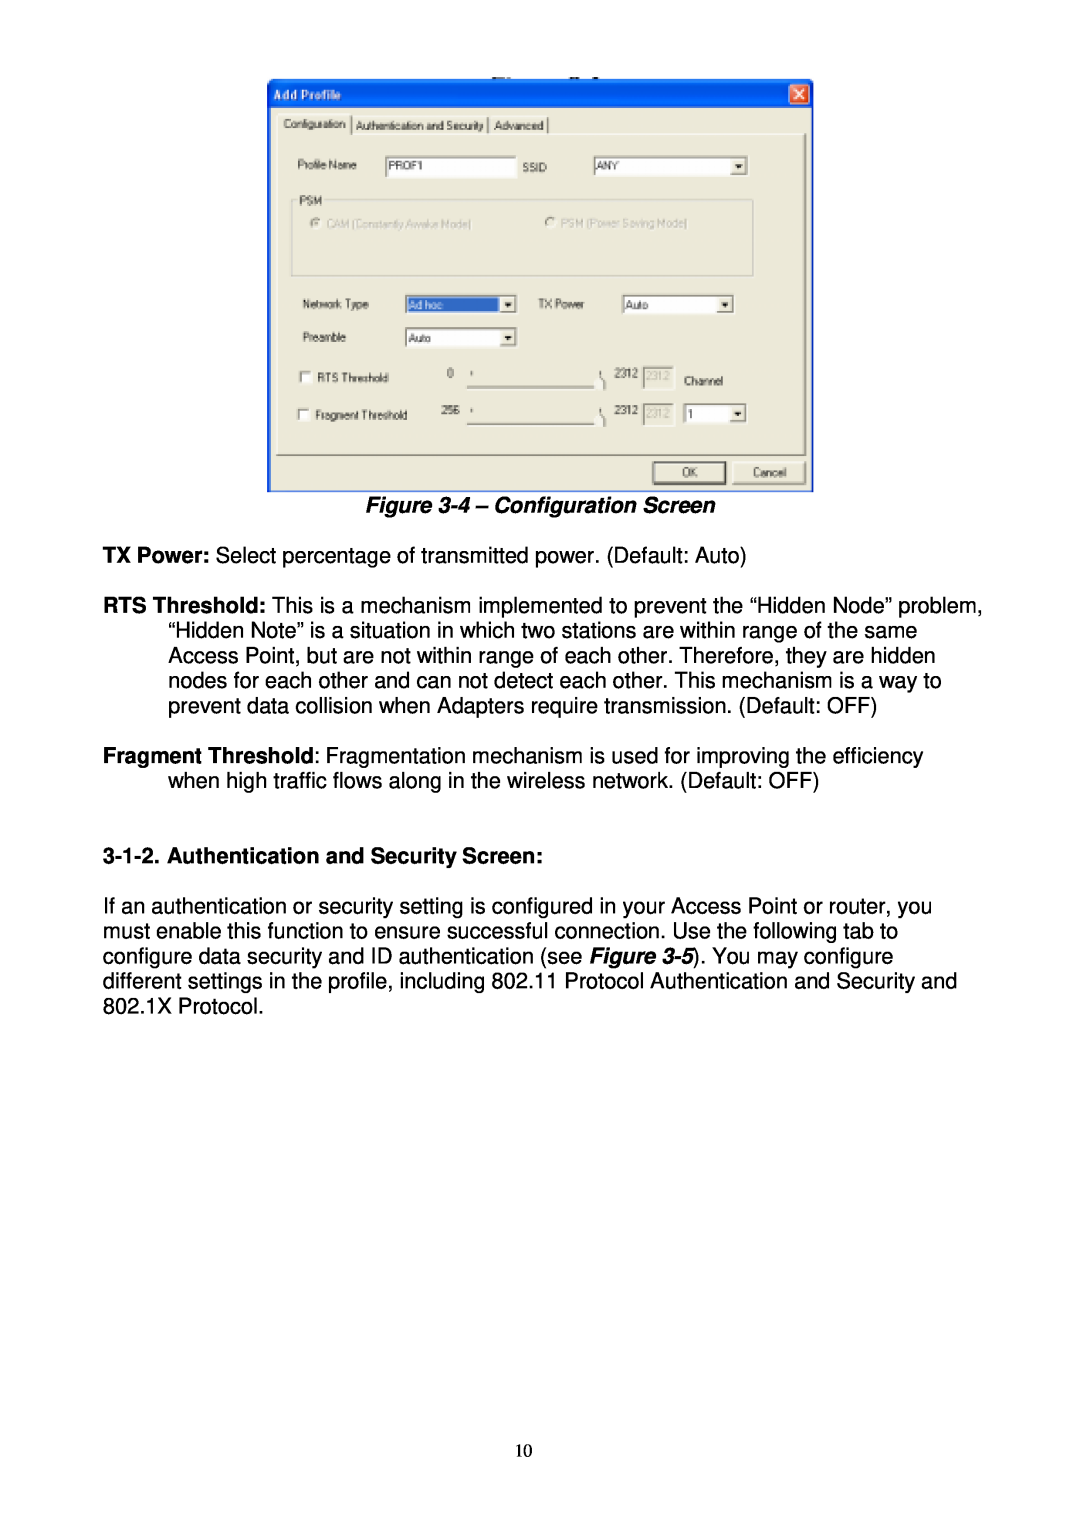 Gigabyte GN-WPKG user manual 4 - Configuration Screen, Authentication and Security Screen 